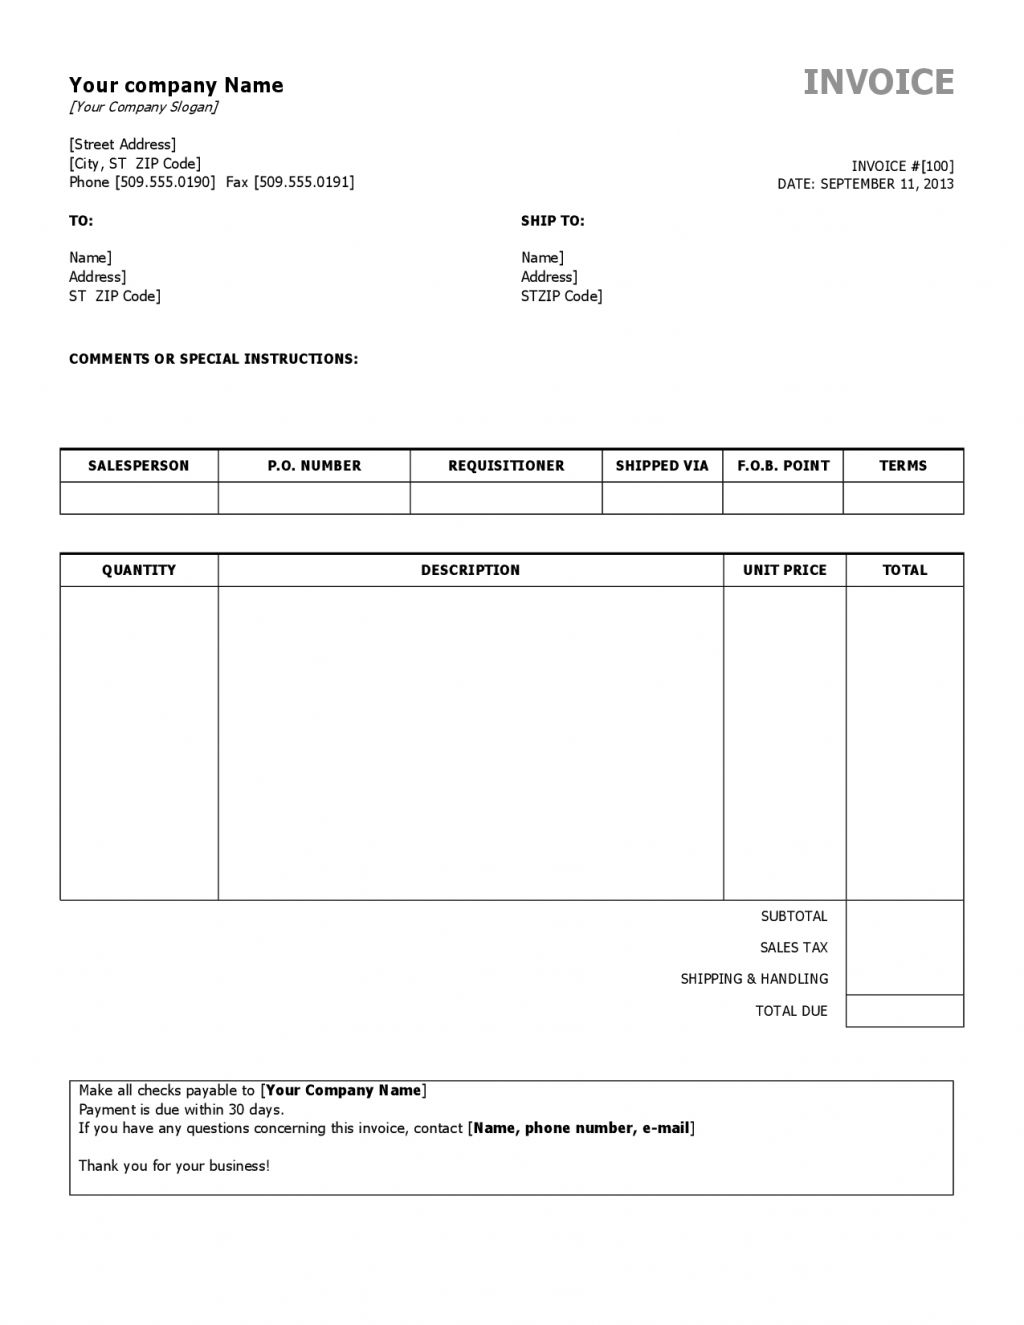 Copy Of An Invoice Invoice Template Ideas